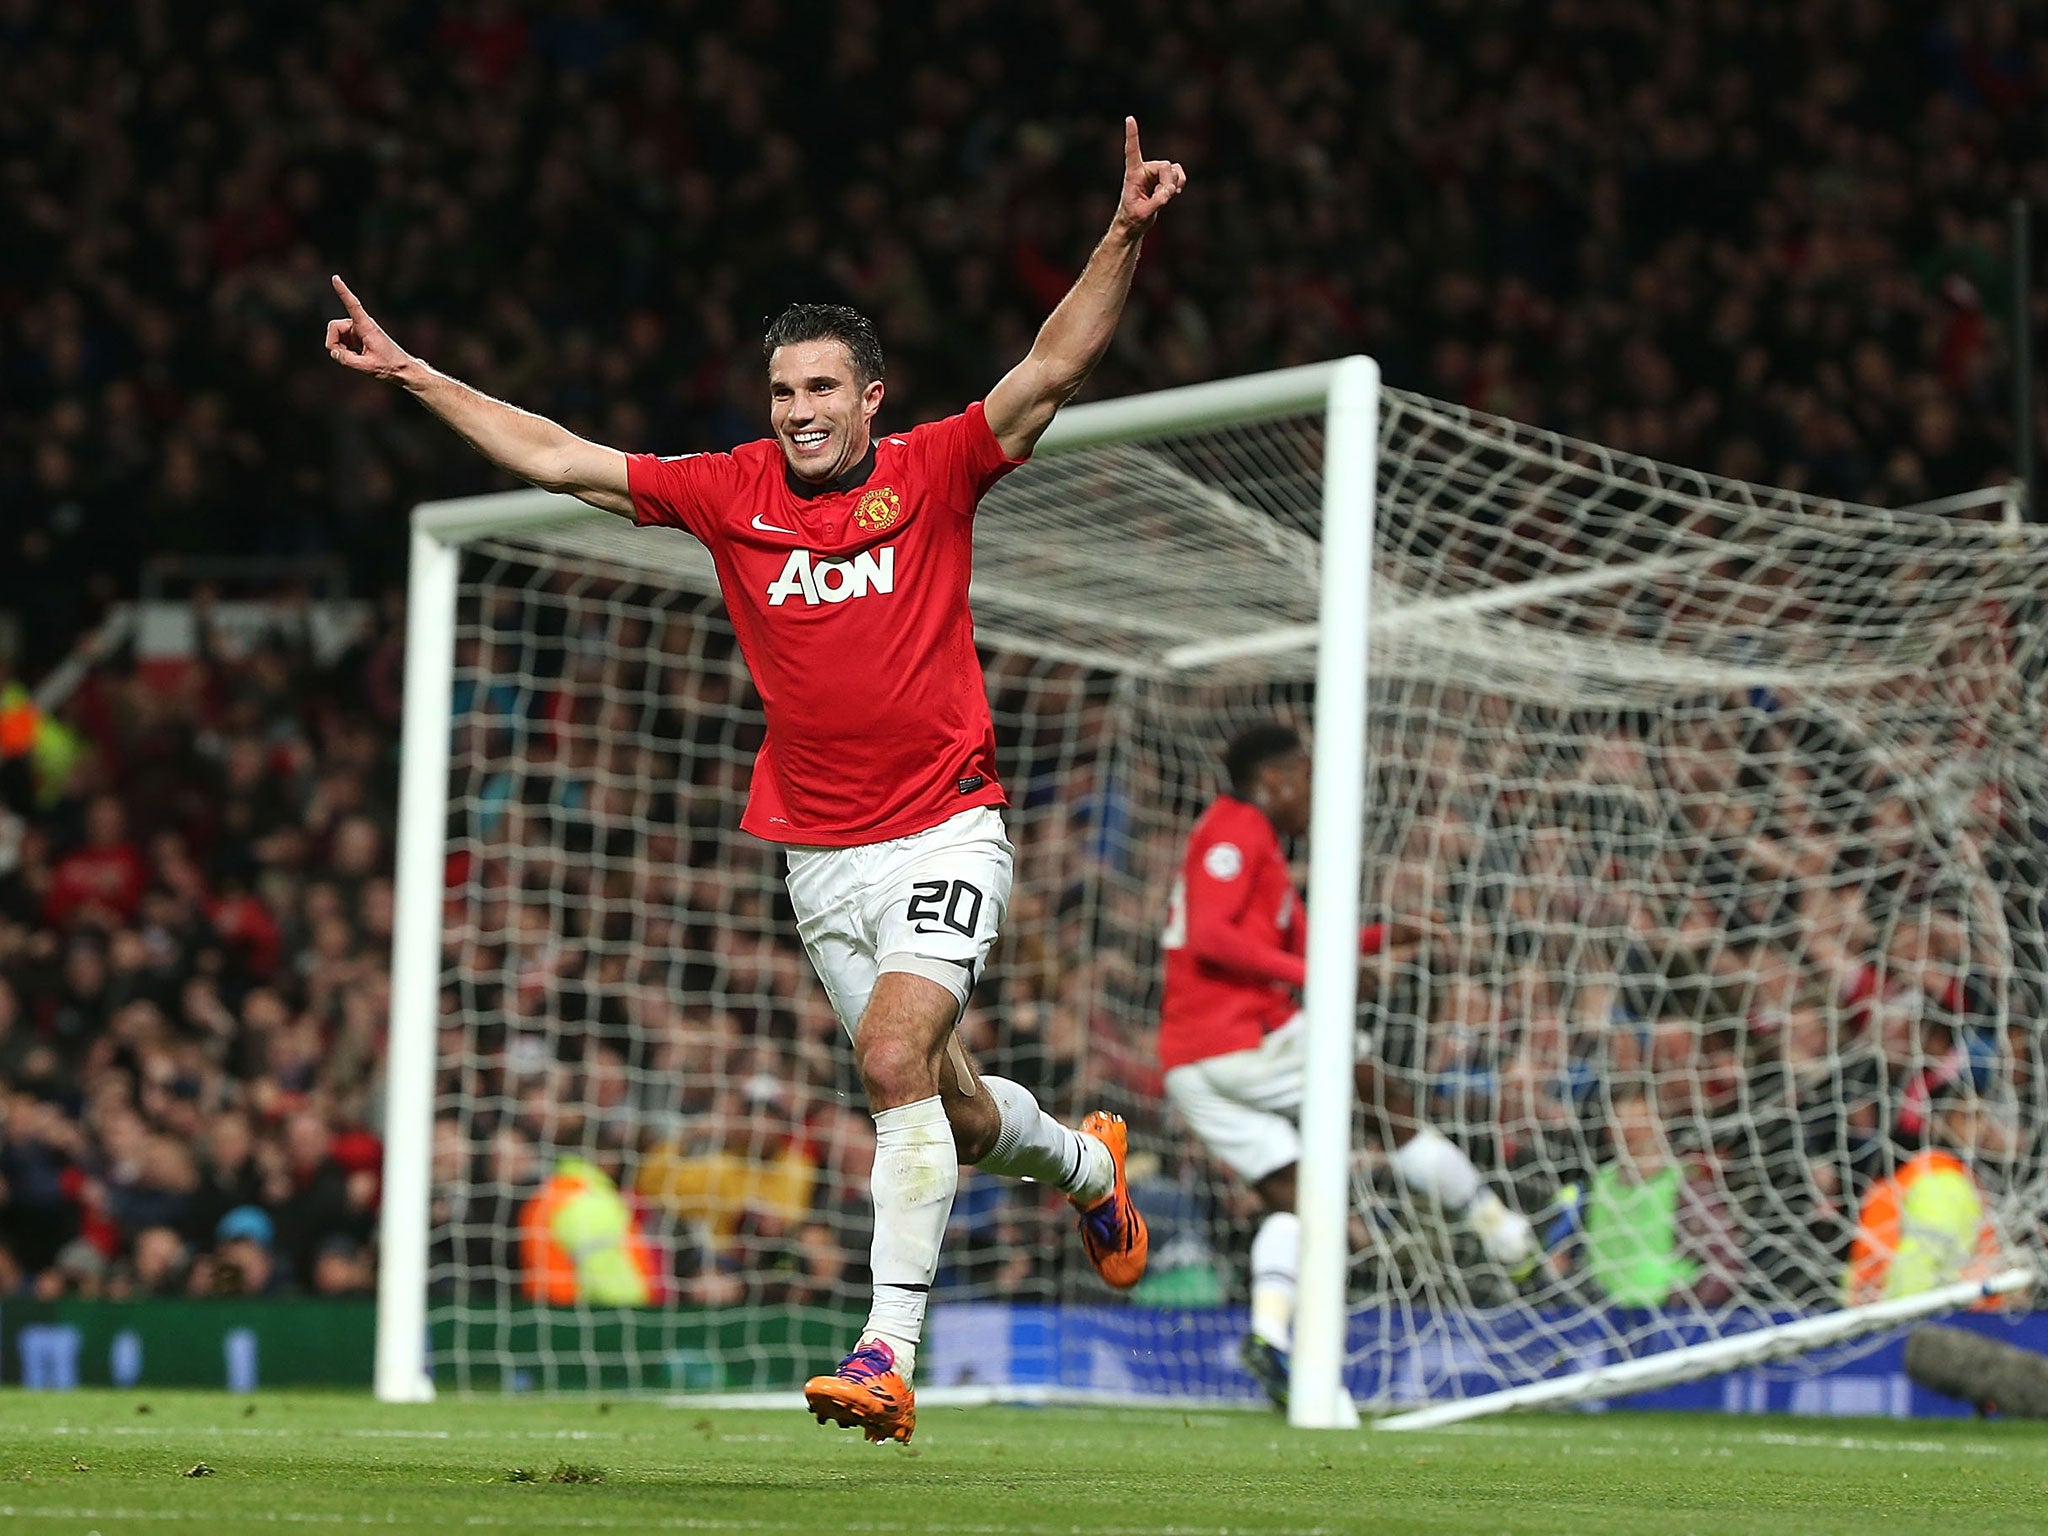 Will you be selecting Robin van Persie to spearhead your team?